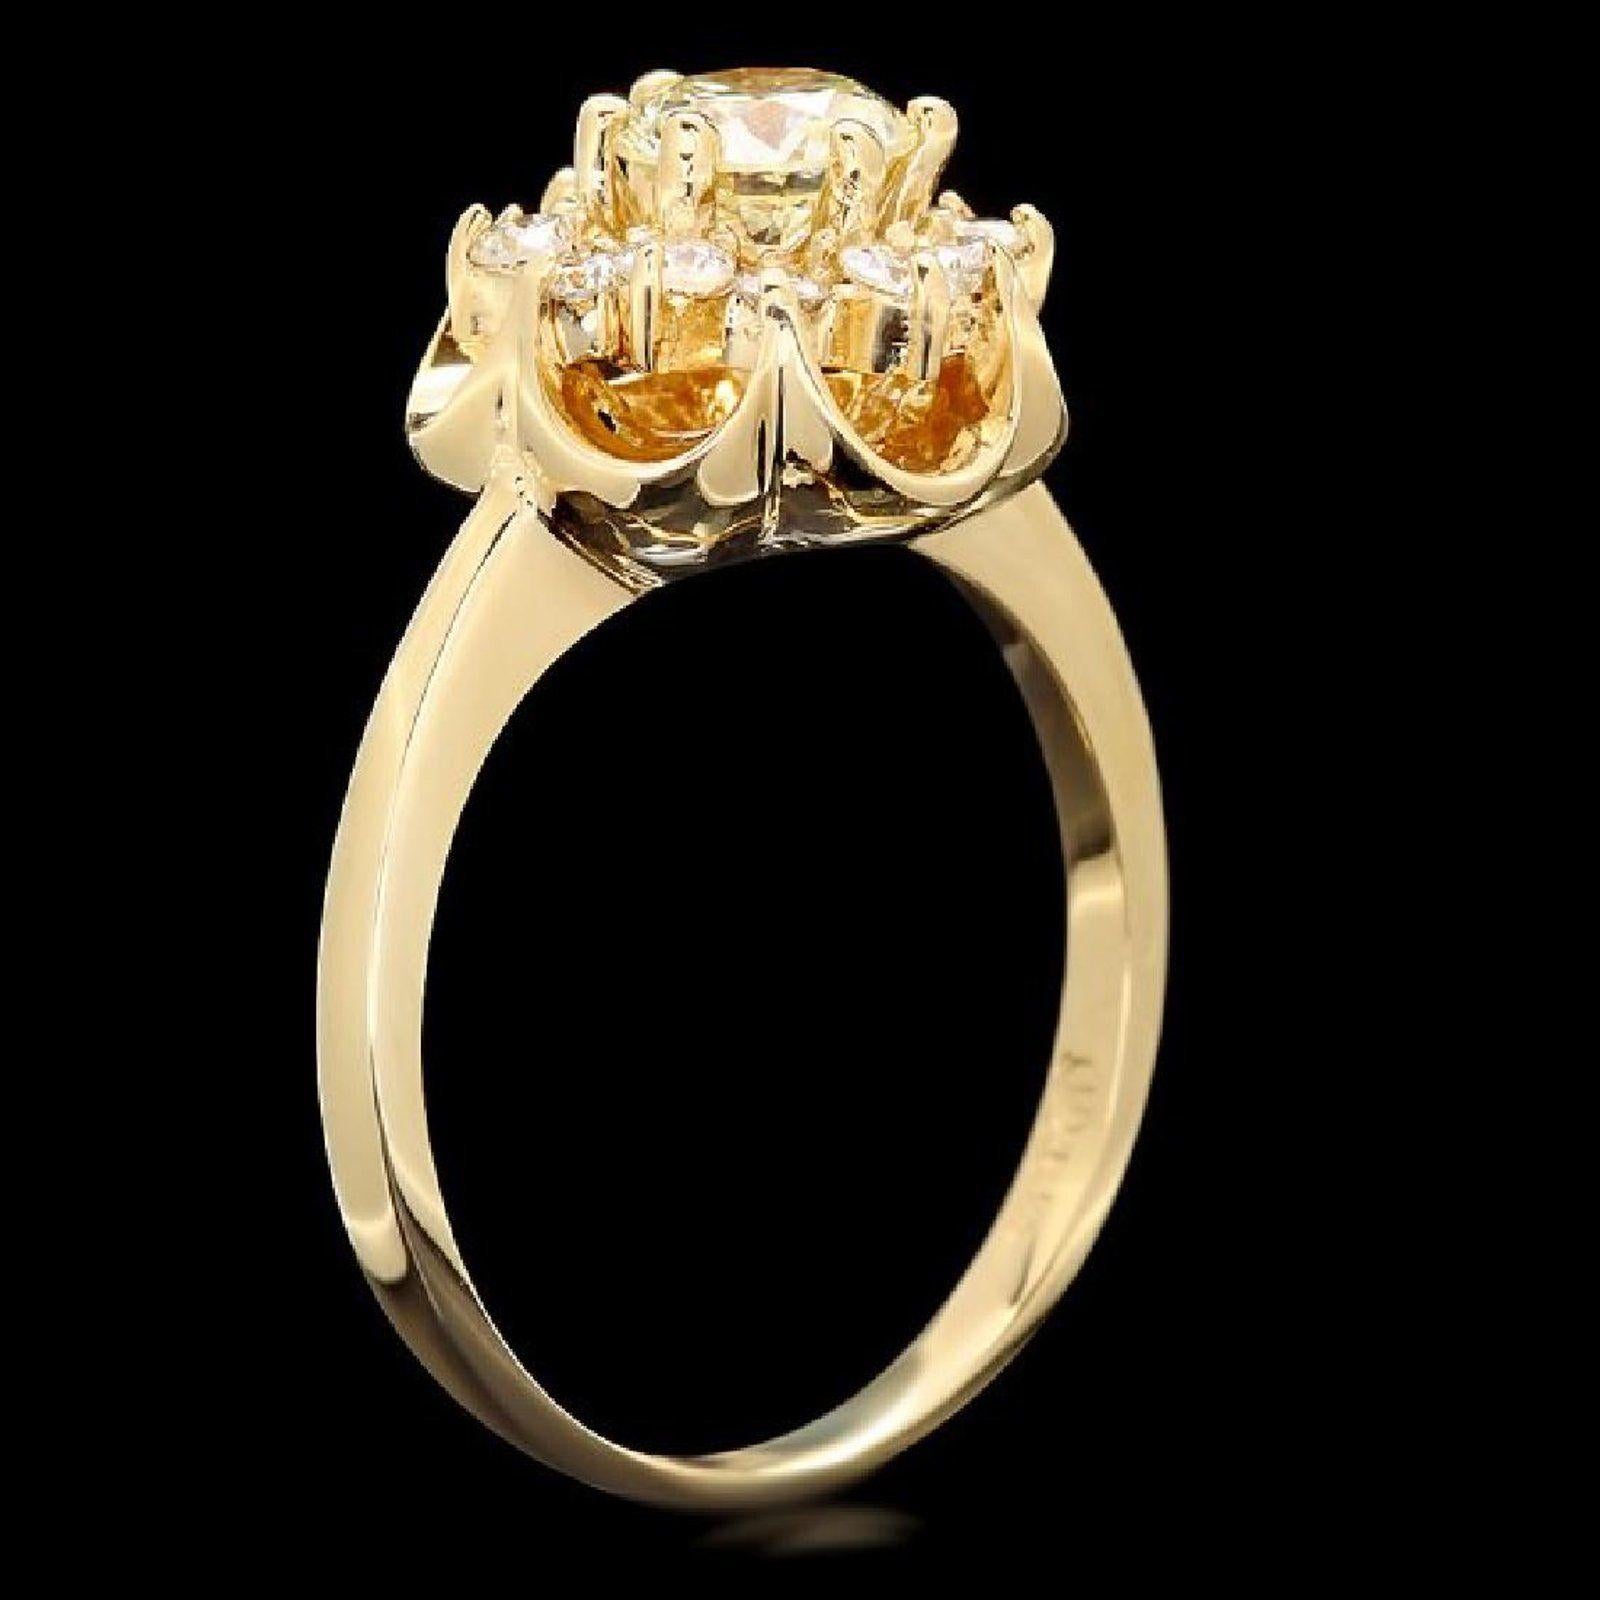 Splendid 1.15 Carats Natural Diamond 14K Solid Yellow Gold Ring

Suggested Replacement Value: Approx. $4,200.00

Stamped: 14K

Total Natural Round Cut Diamonds Weight: Approx. 1.15 Carats (color G-H / Clarity SI1-SI2)

Center Diamond Weight is: